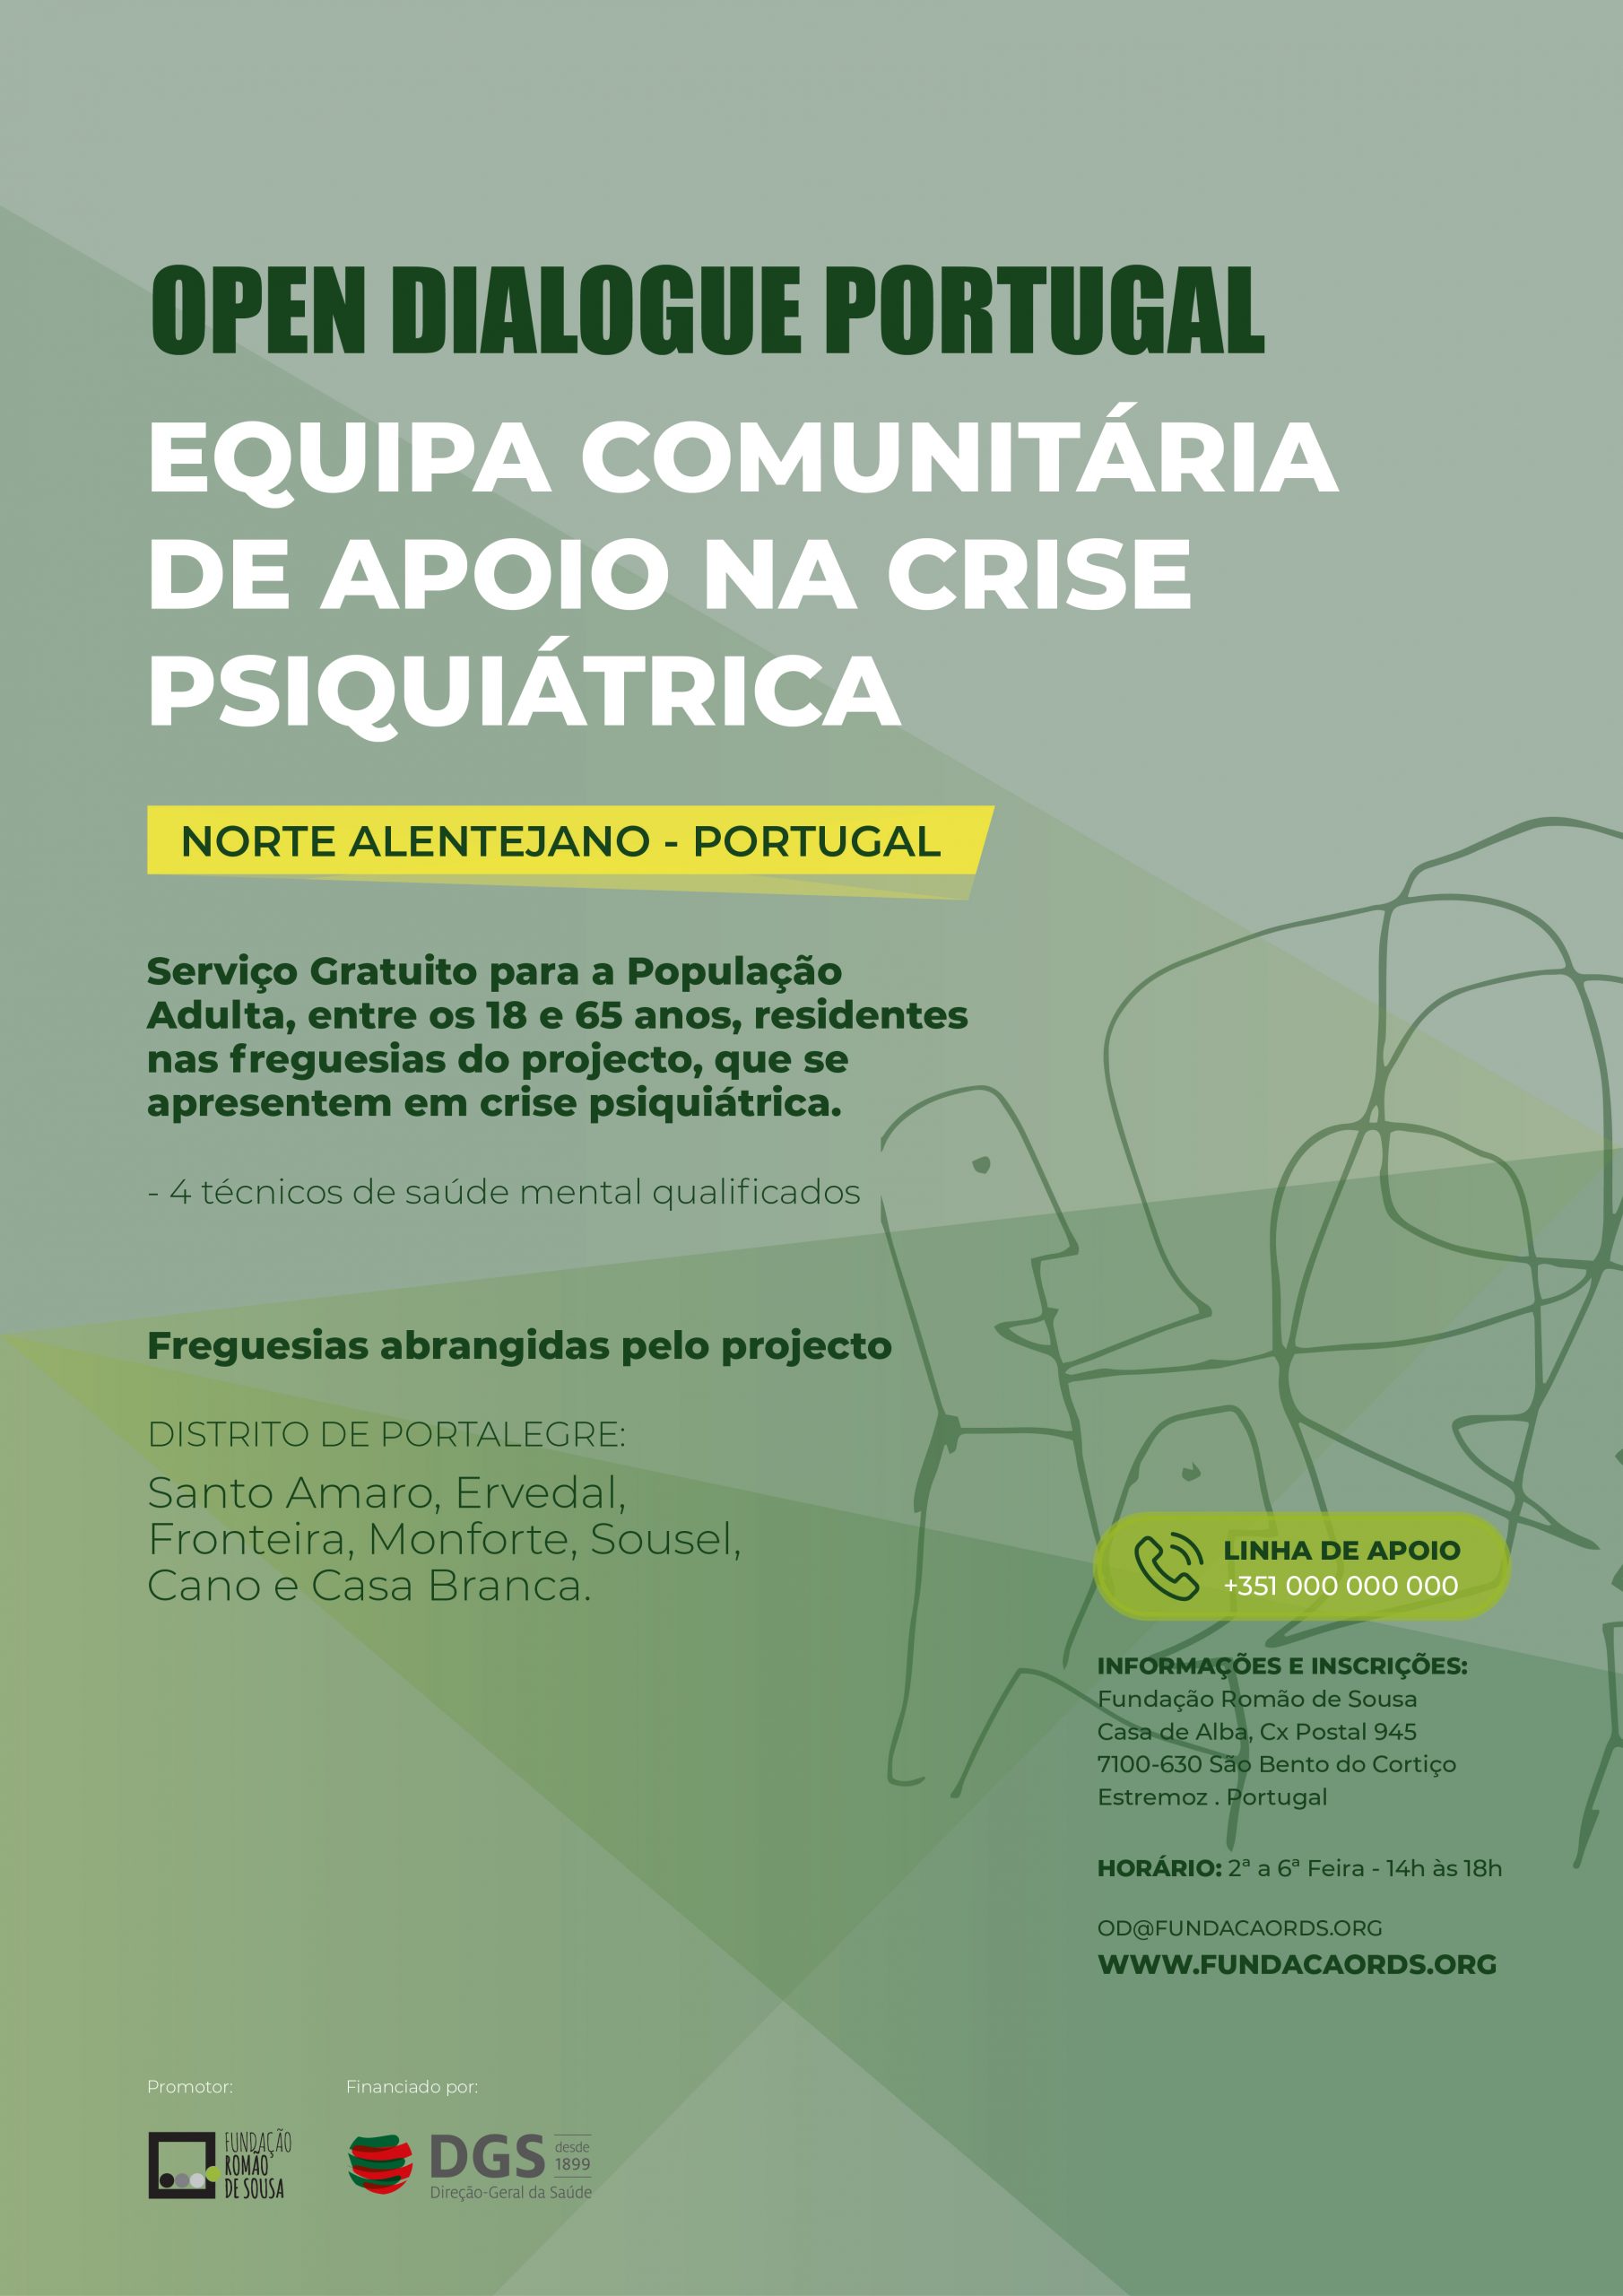 Projecto Open Dialogue Portugal